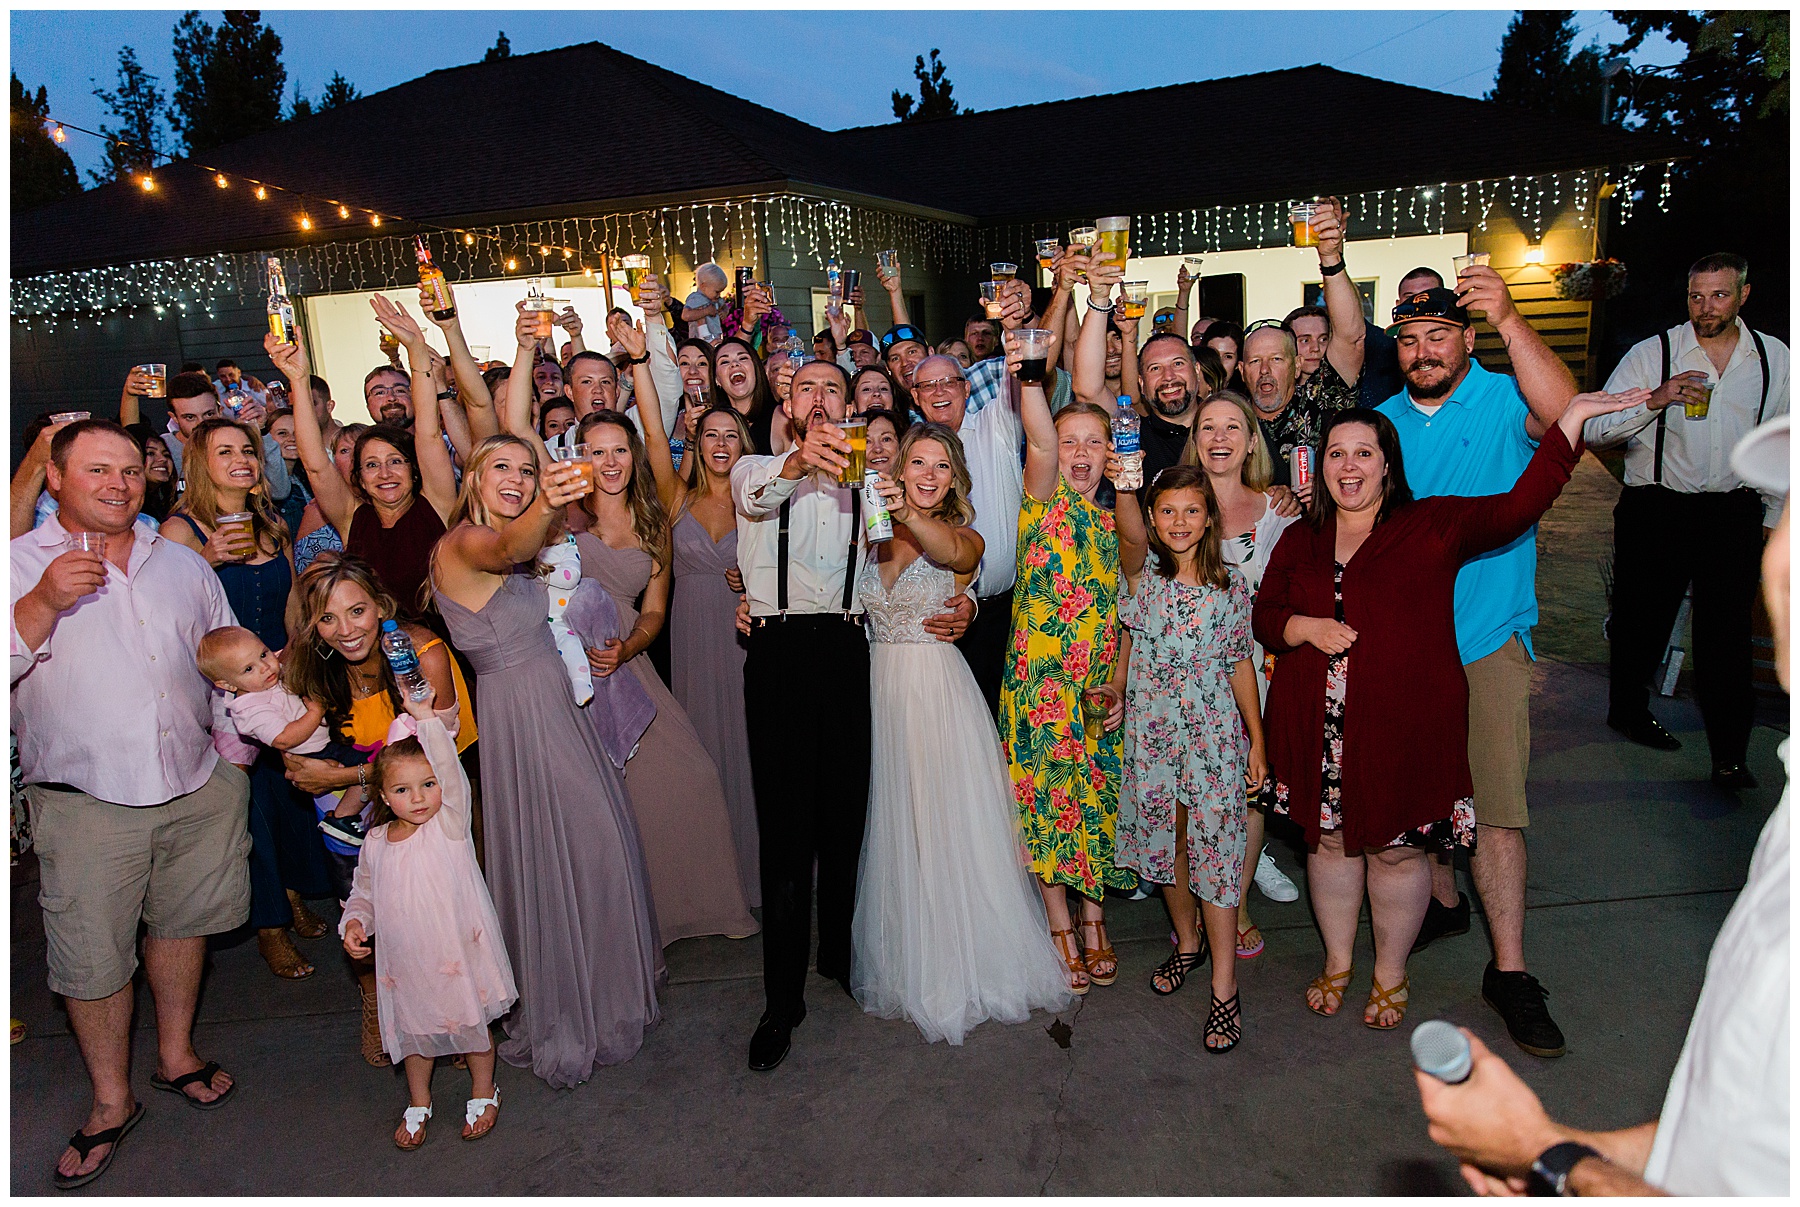 Everyone who attended the Bend Oregon Intimate Backyard Wedding raising their glasses in celebration. 